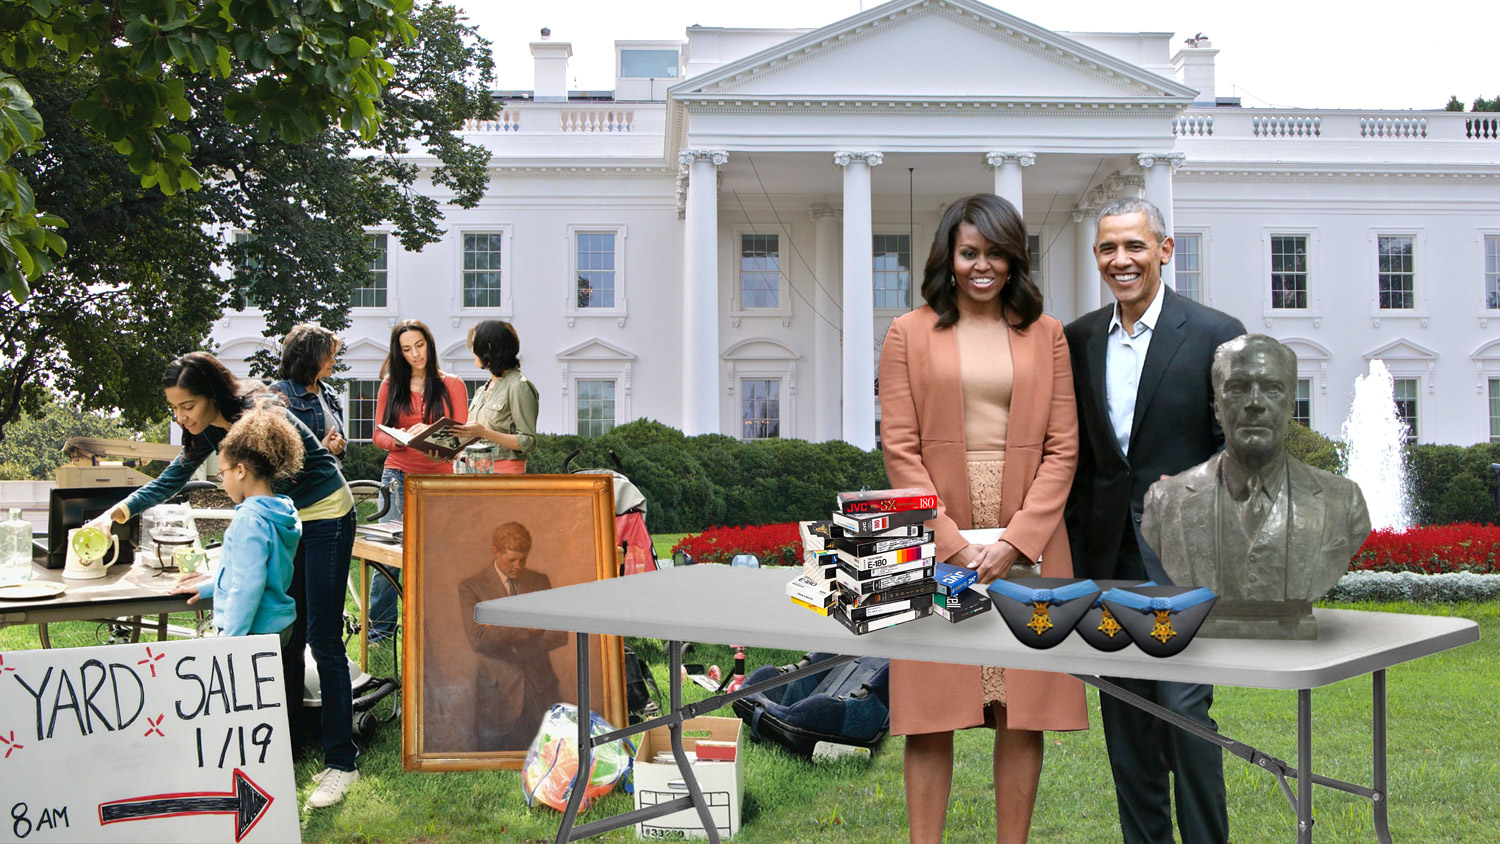 Barack and Michelle Obama Host Their Annual Yard Sale Outside the White House